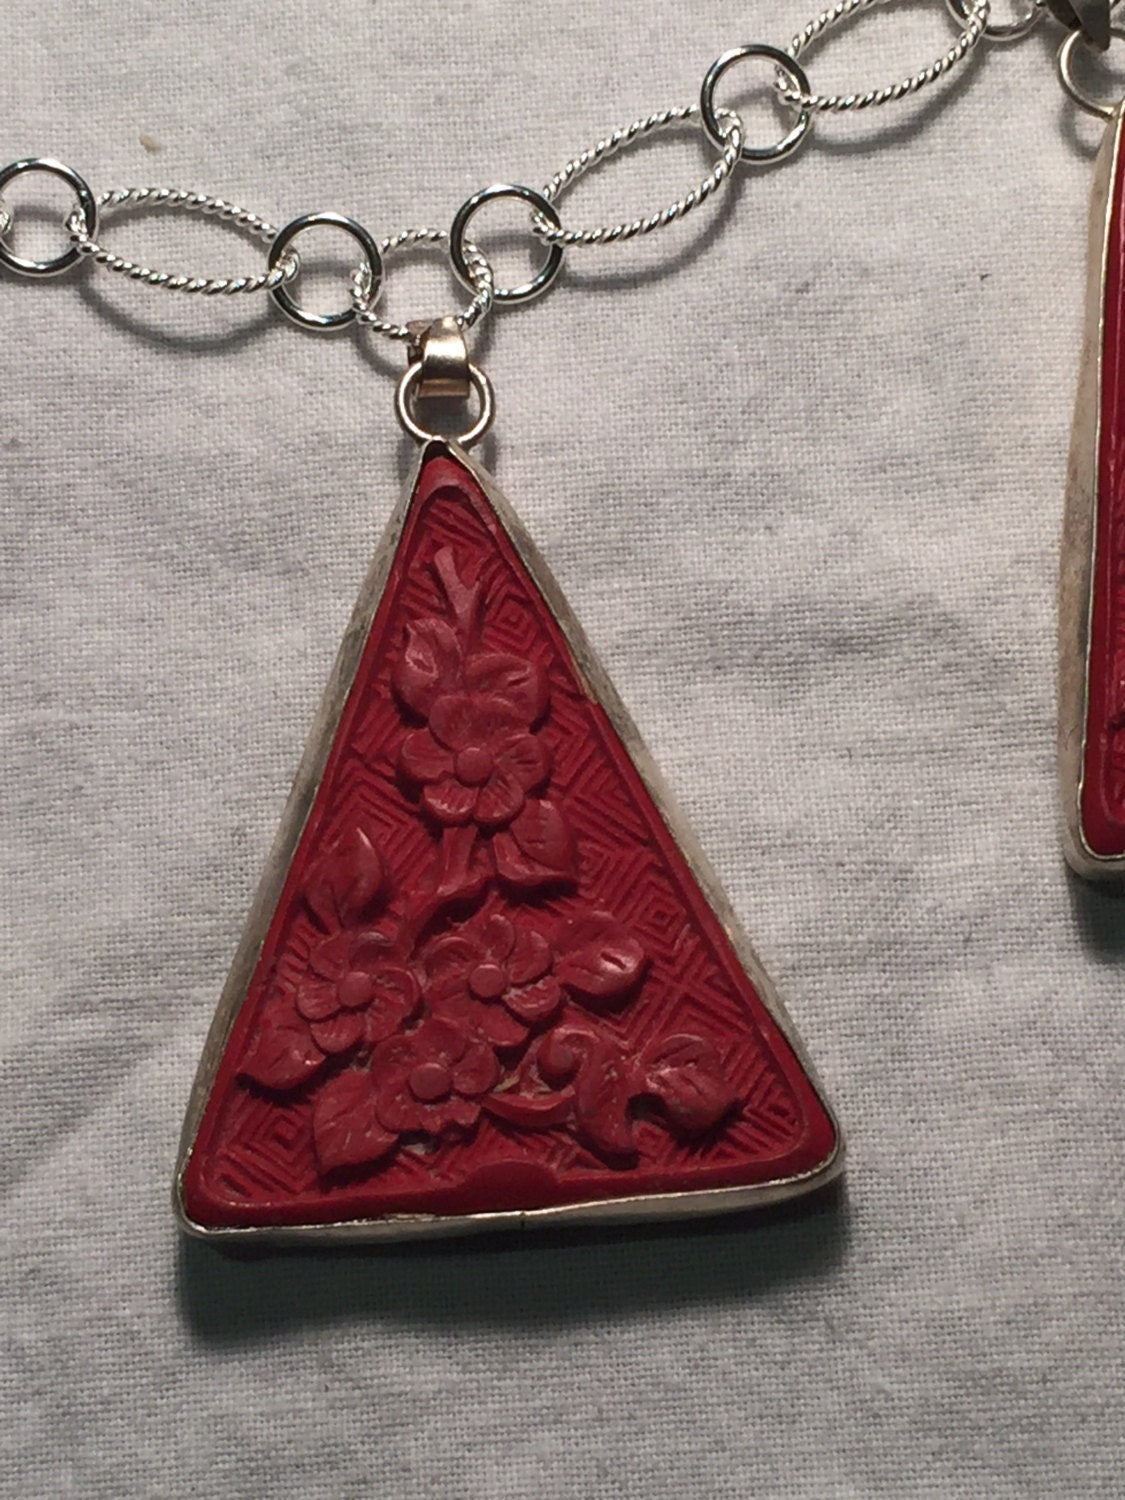 Vintage Handmade Carved Cinnabar Lacquer Silver Pendant